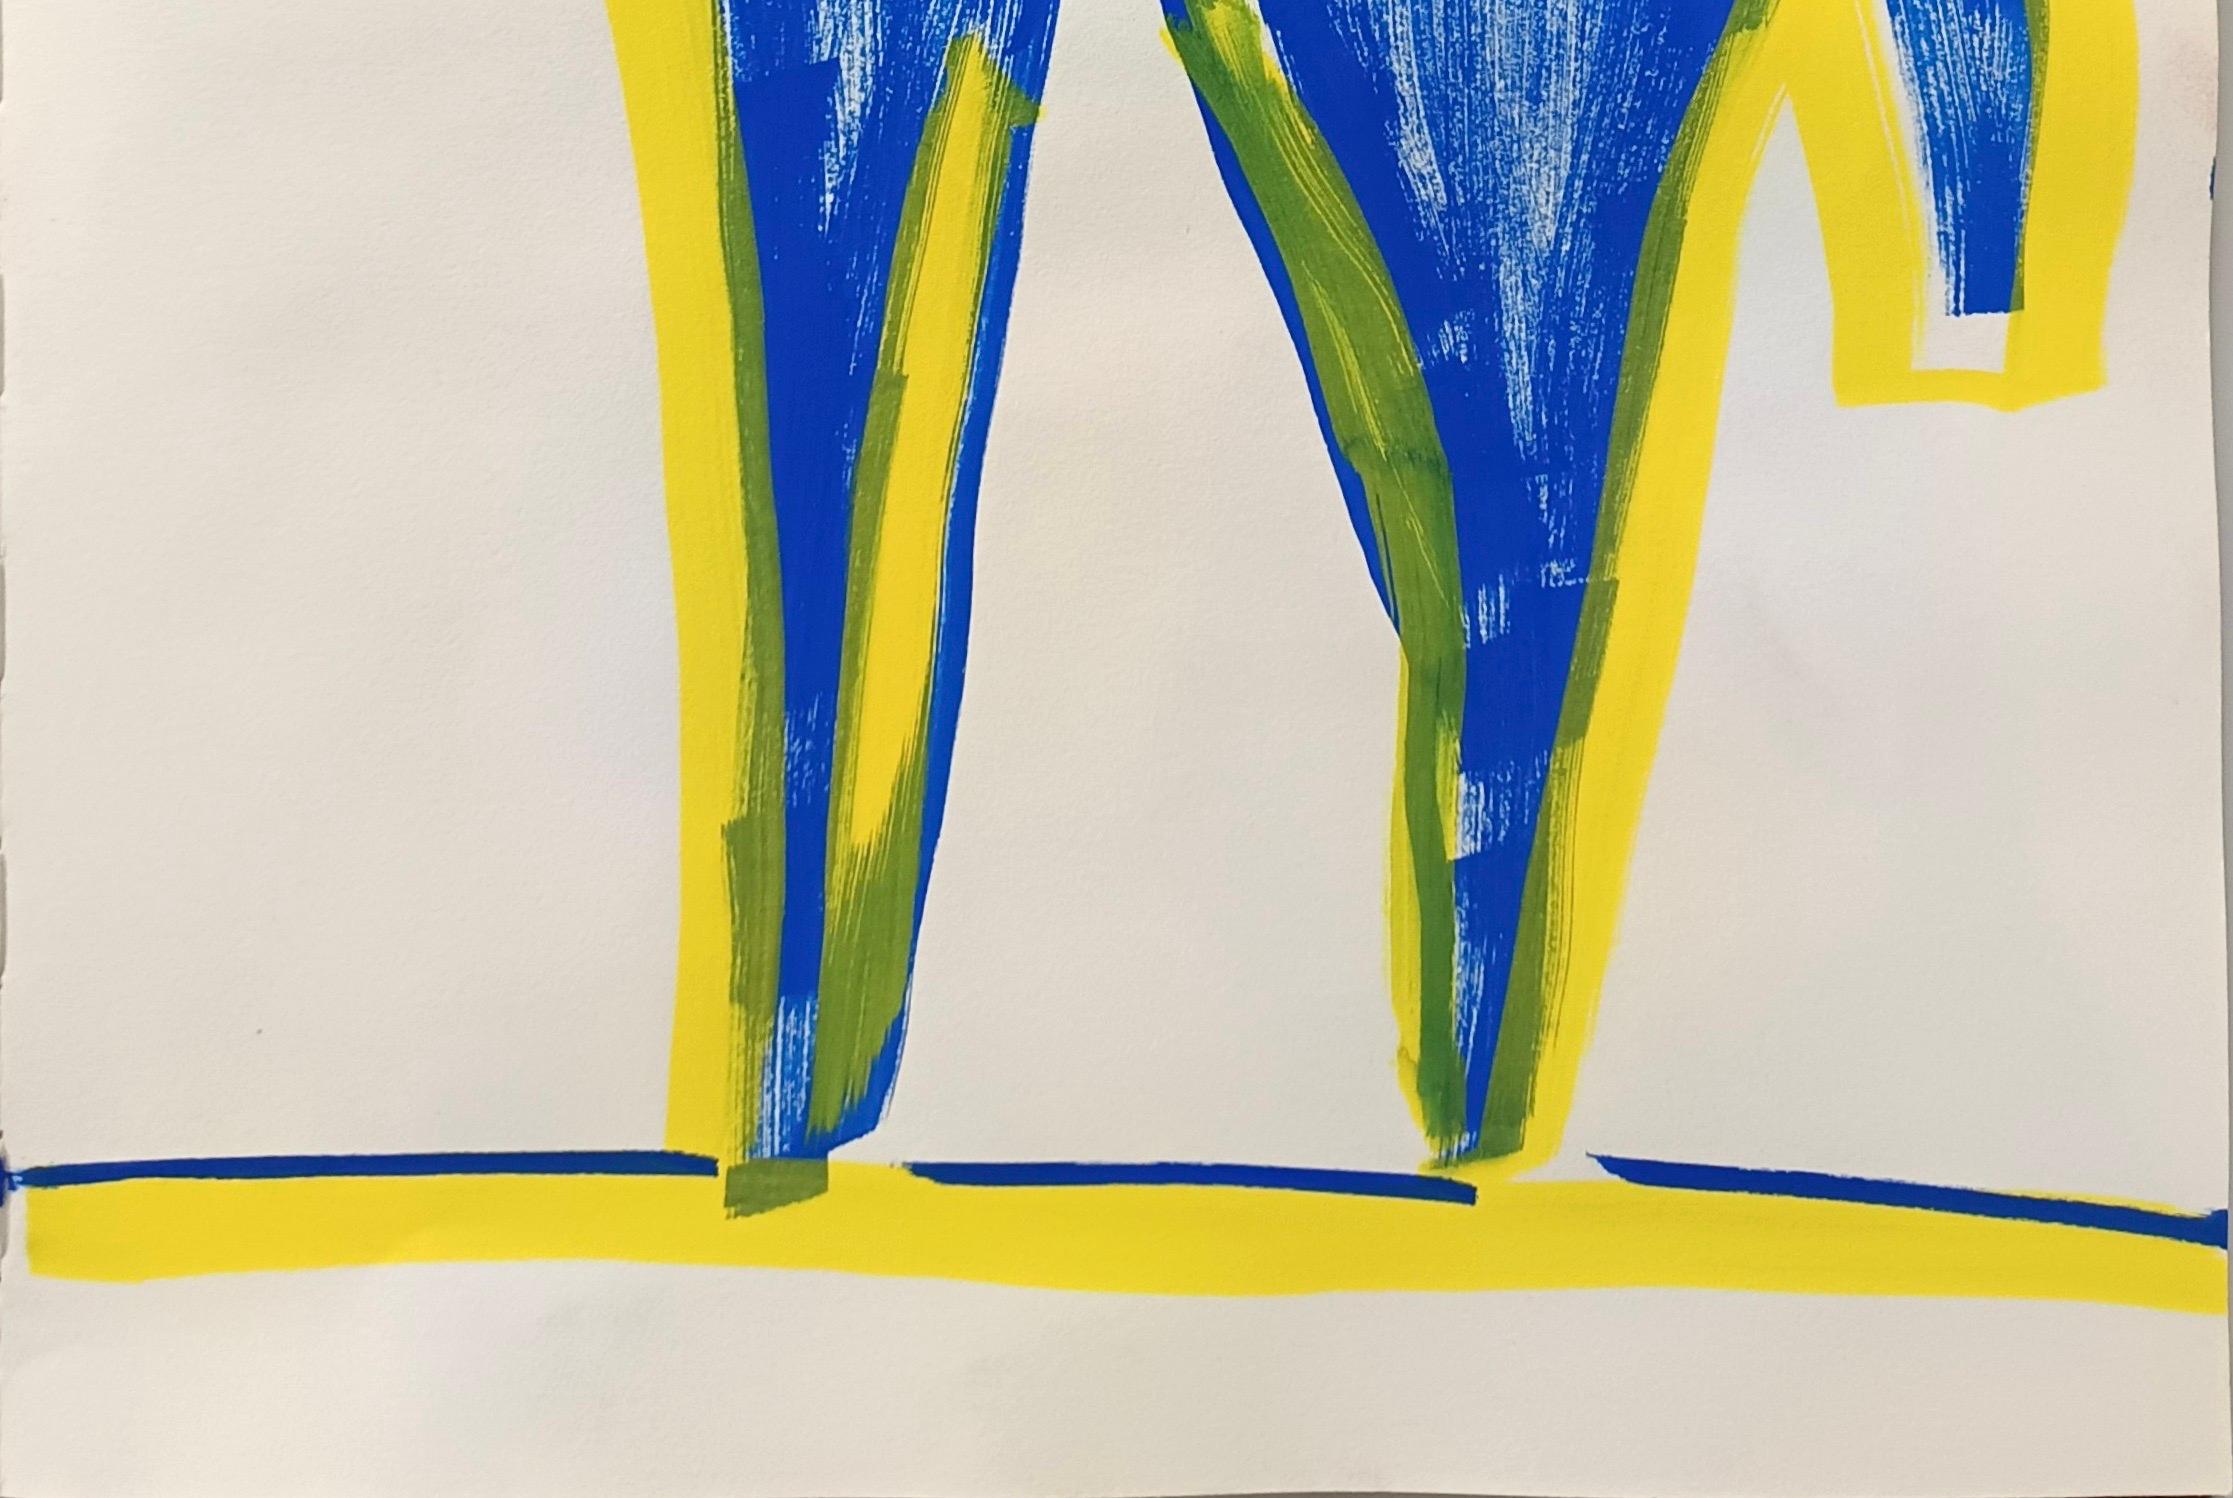 Untitled by E. Wenk, 2020-21 -Blue and Yellow Acrylic on Paper, NeoExpressionism - Neo-Expressionist Painting by Enzio Wenk